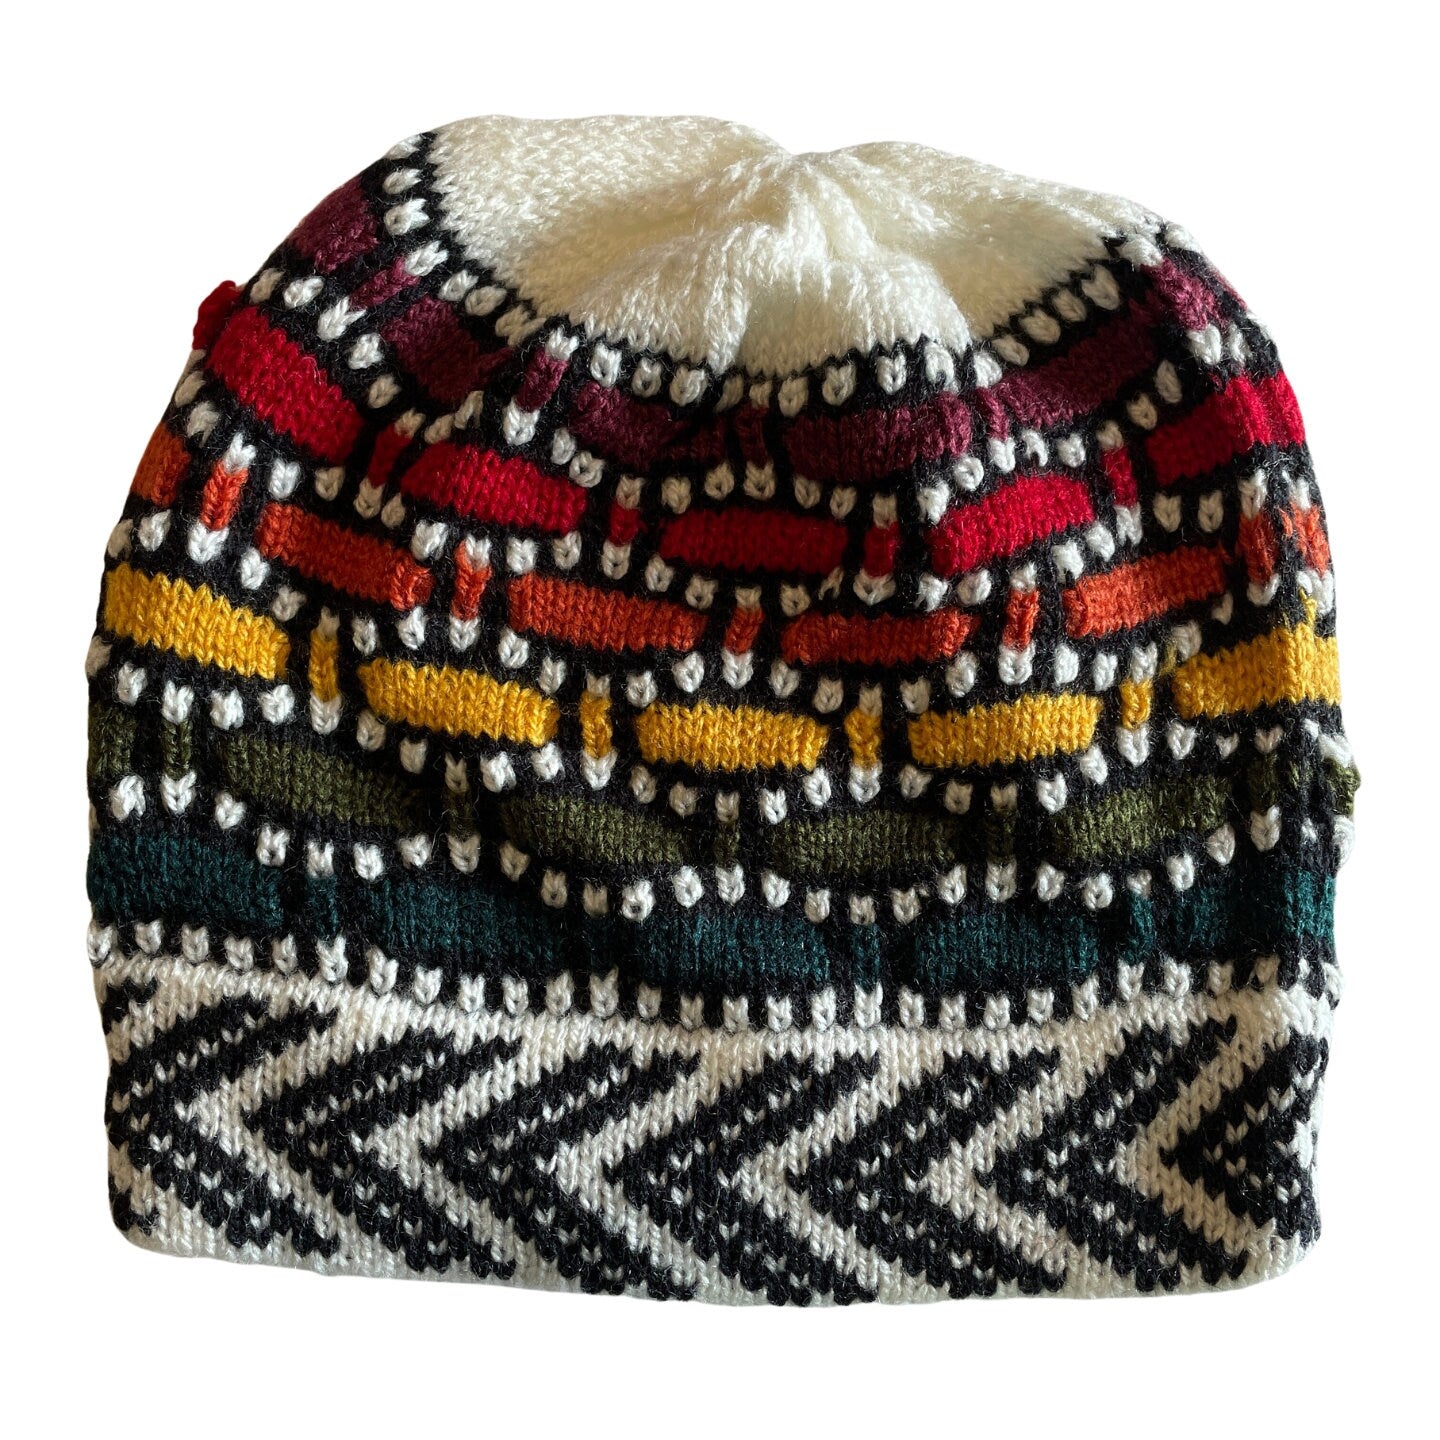 Colorful Knitted Alpaca Beanie Hat